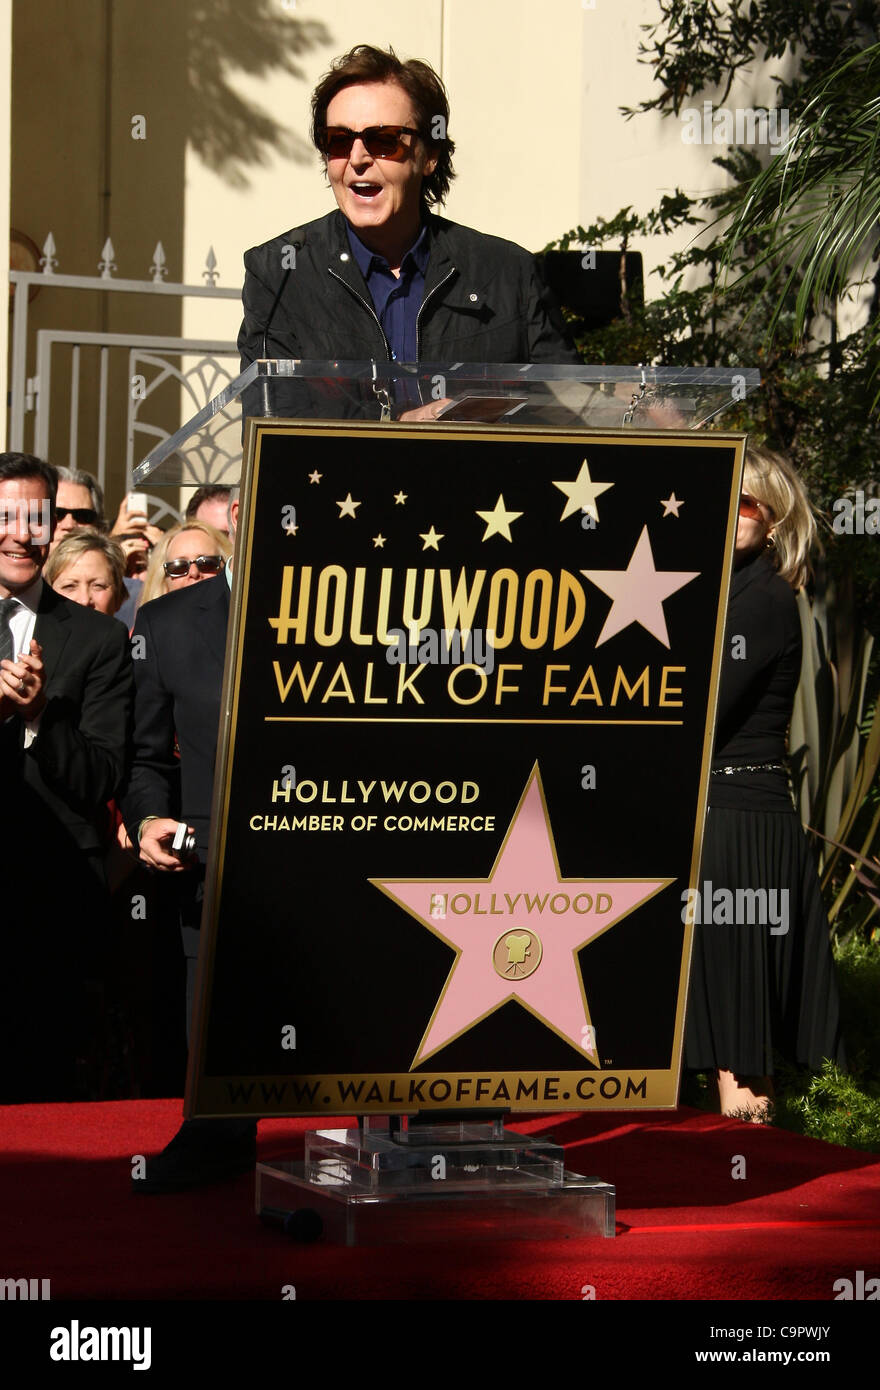 PAUL MCCARTNEY PAUL MCCARTNEY HONORED WITH A STAR ON THE HOLLYWOOD WALK OF FAME HOLLYWOOD LOS ANGELES CALIFORNIA USA 09 Febru Stock Photo